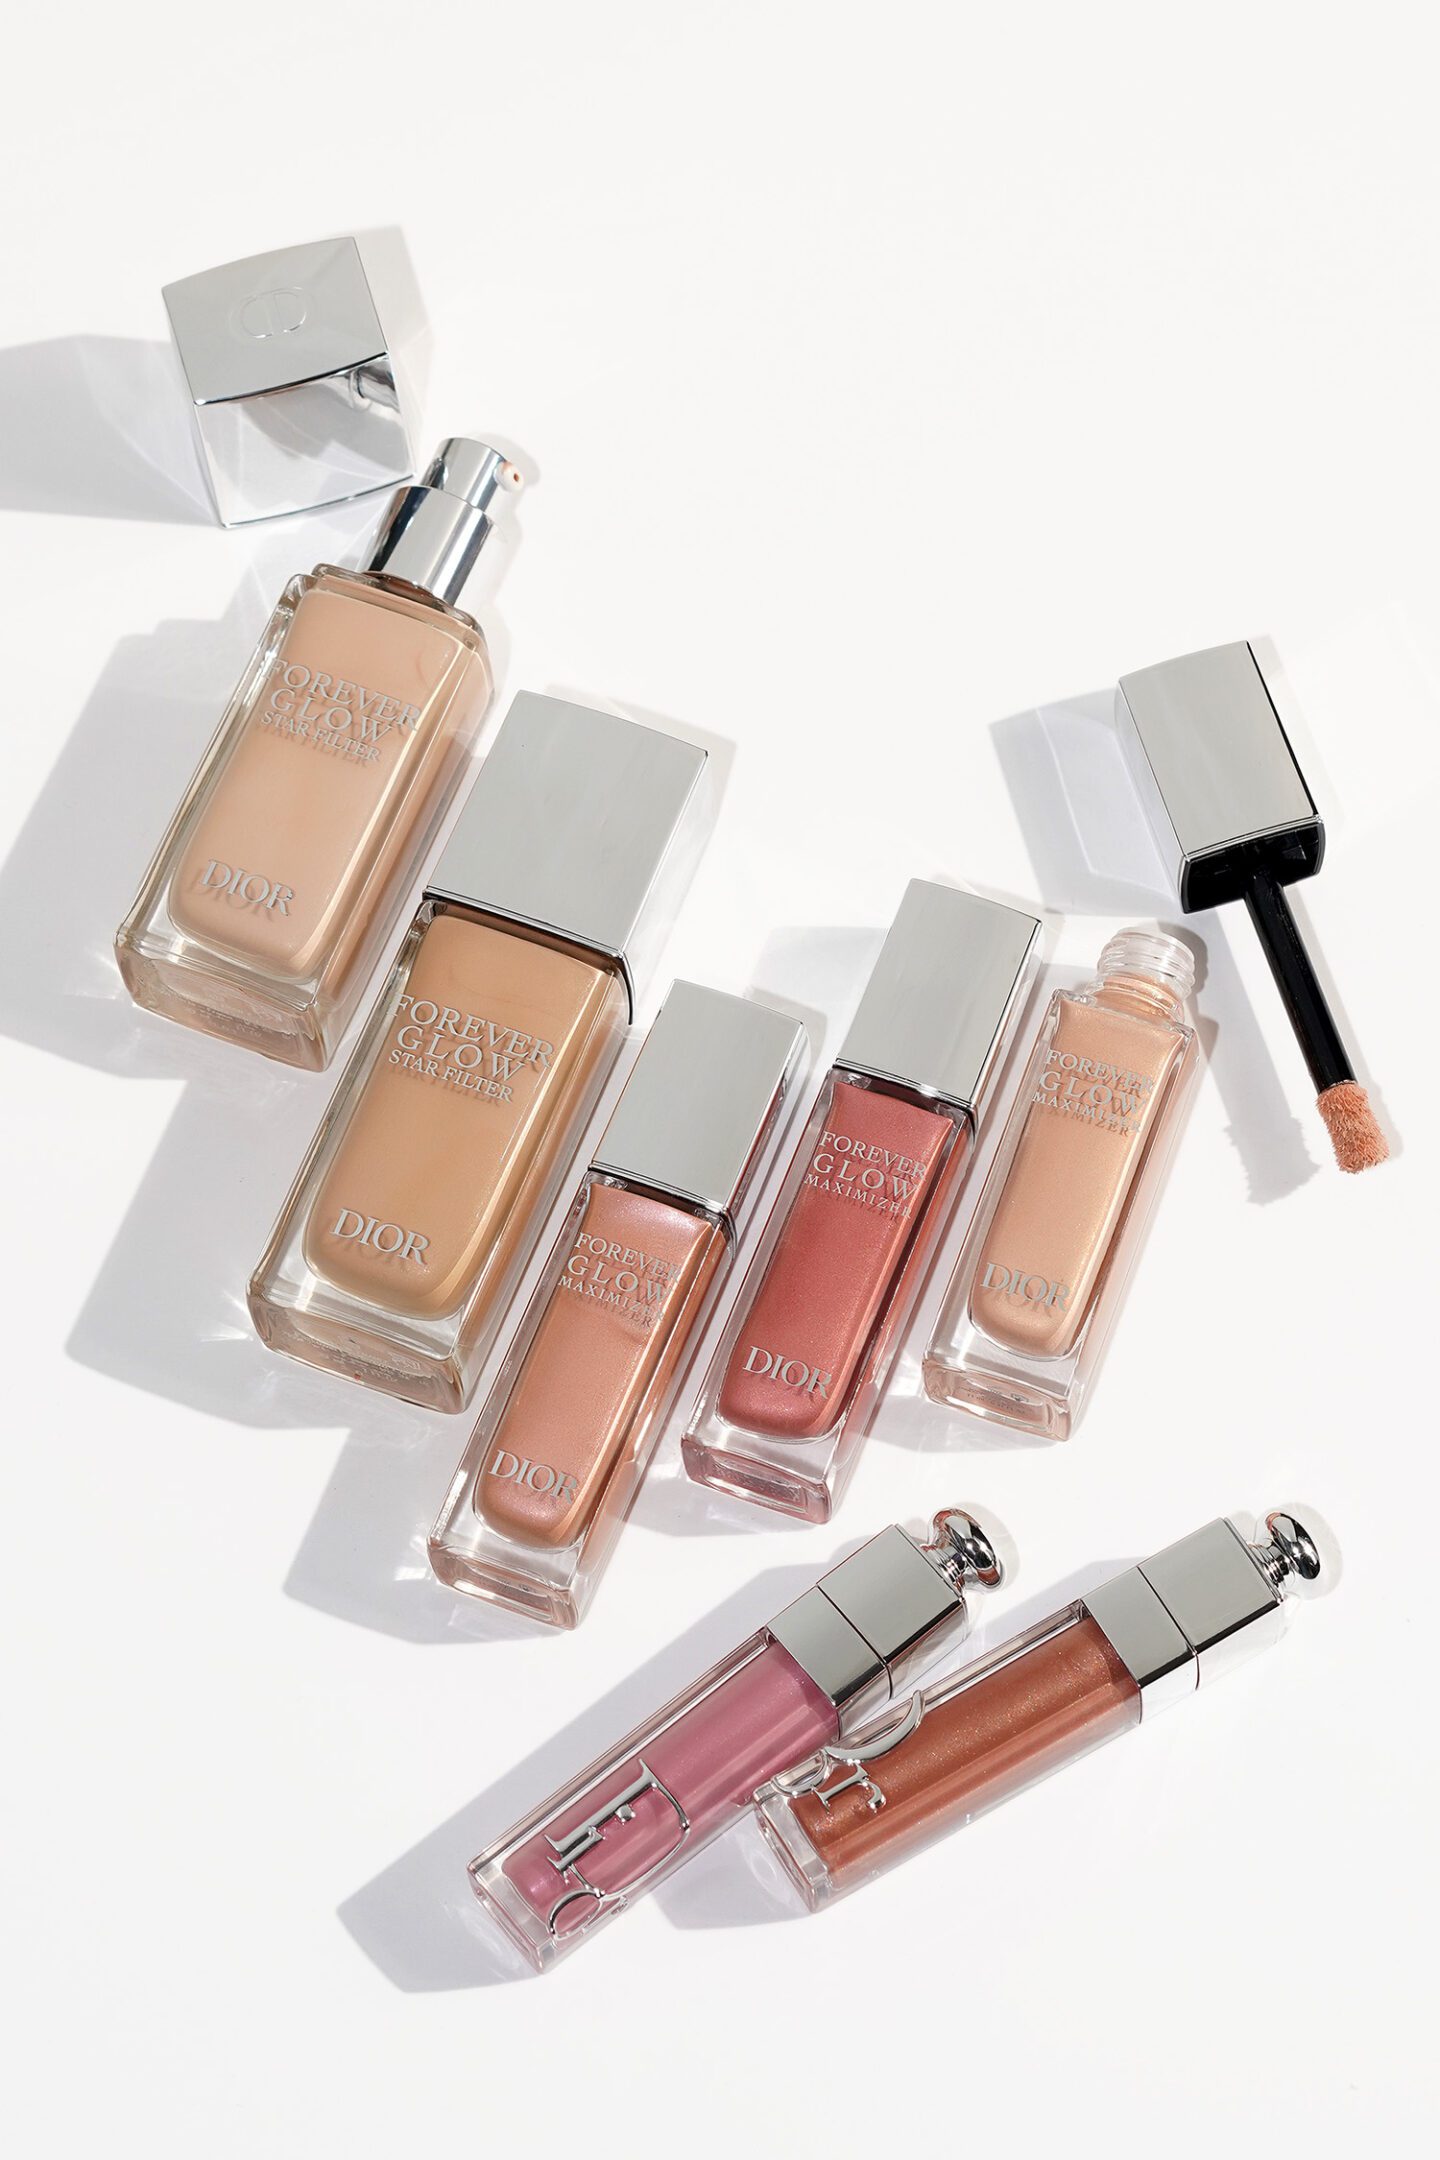 Dior Beauty Forever Glow Star Filter & Maximizer